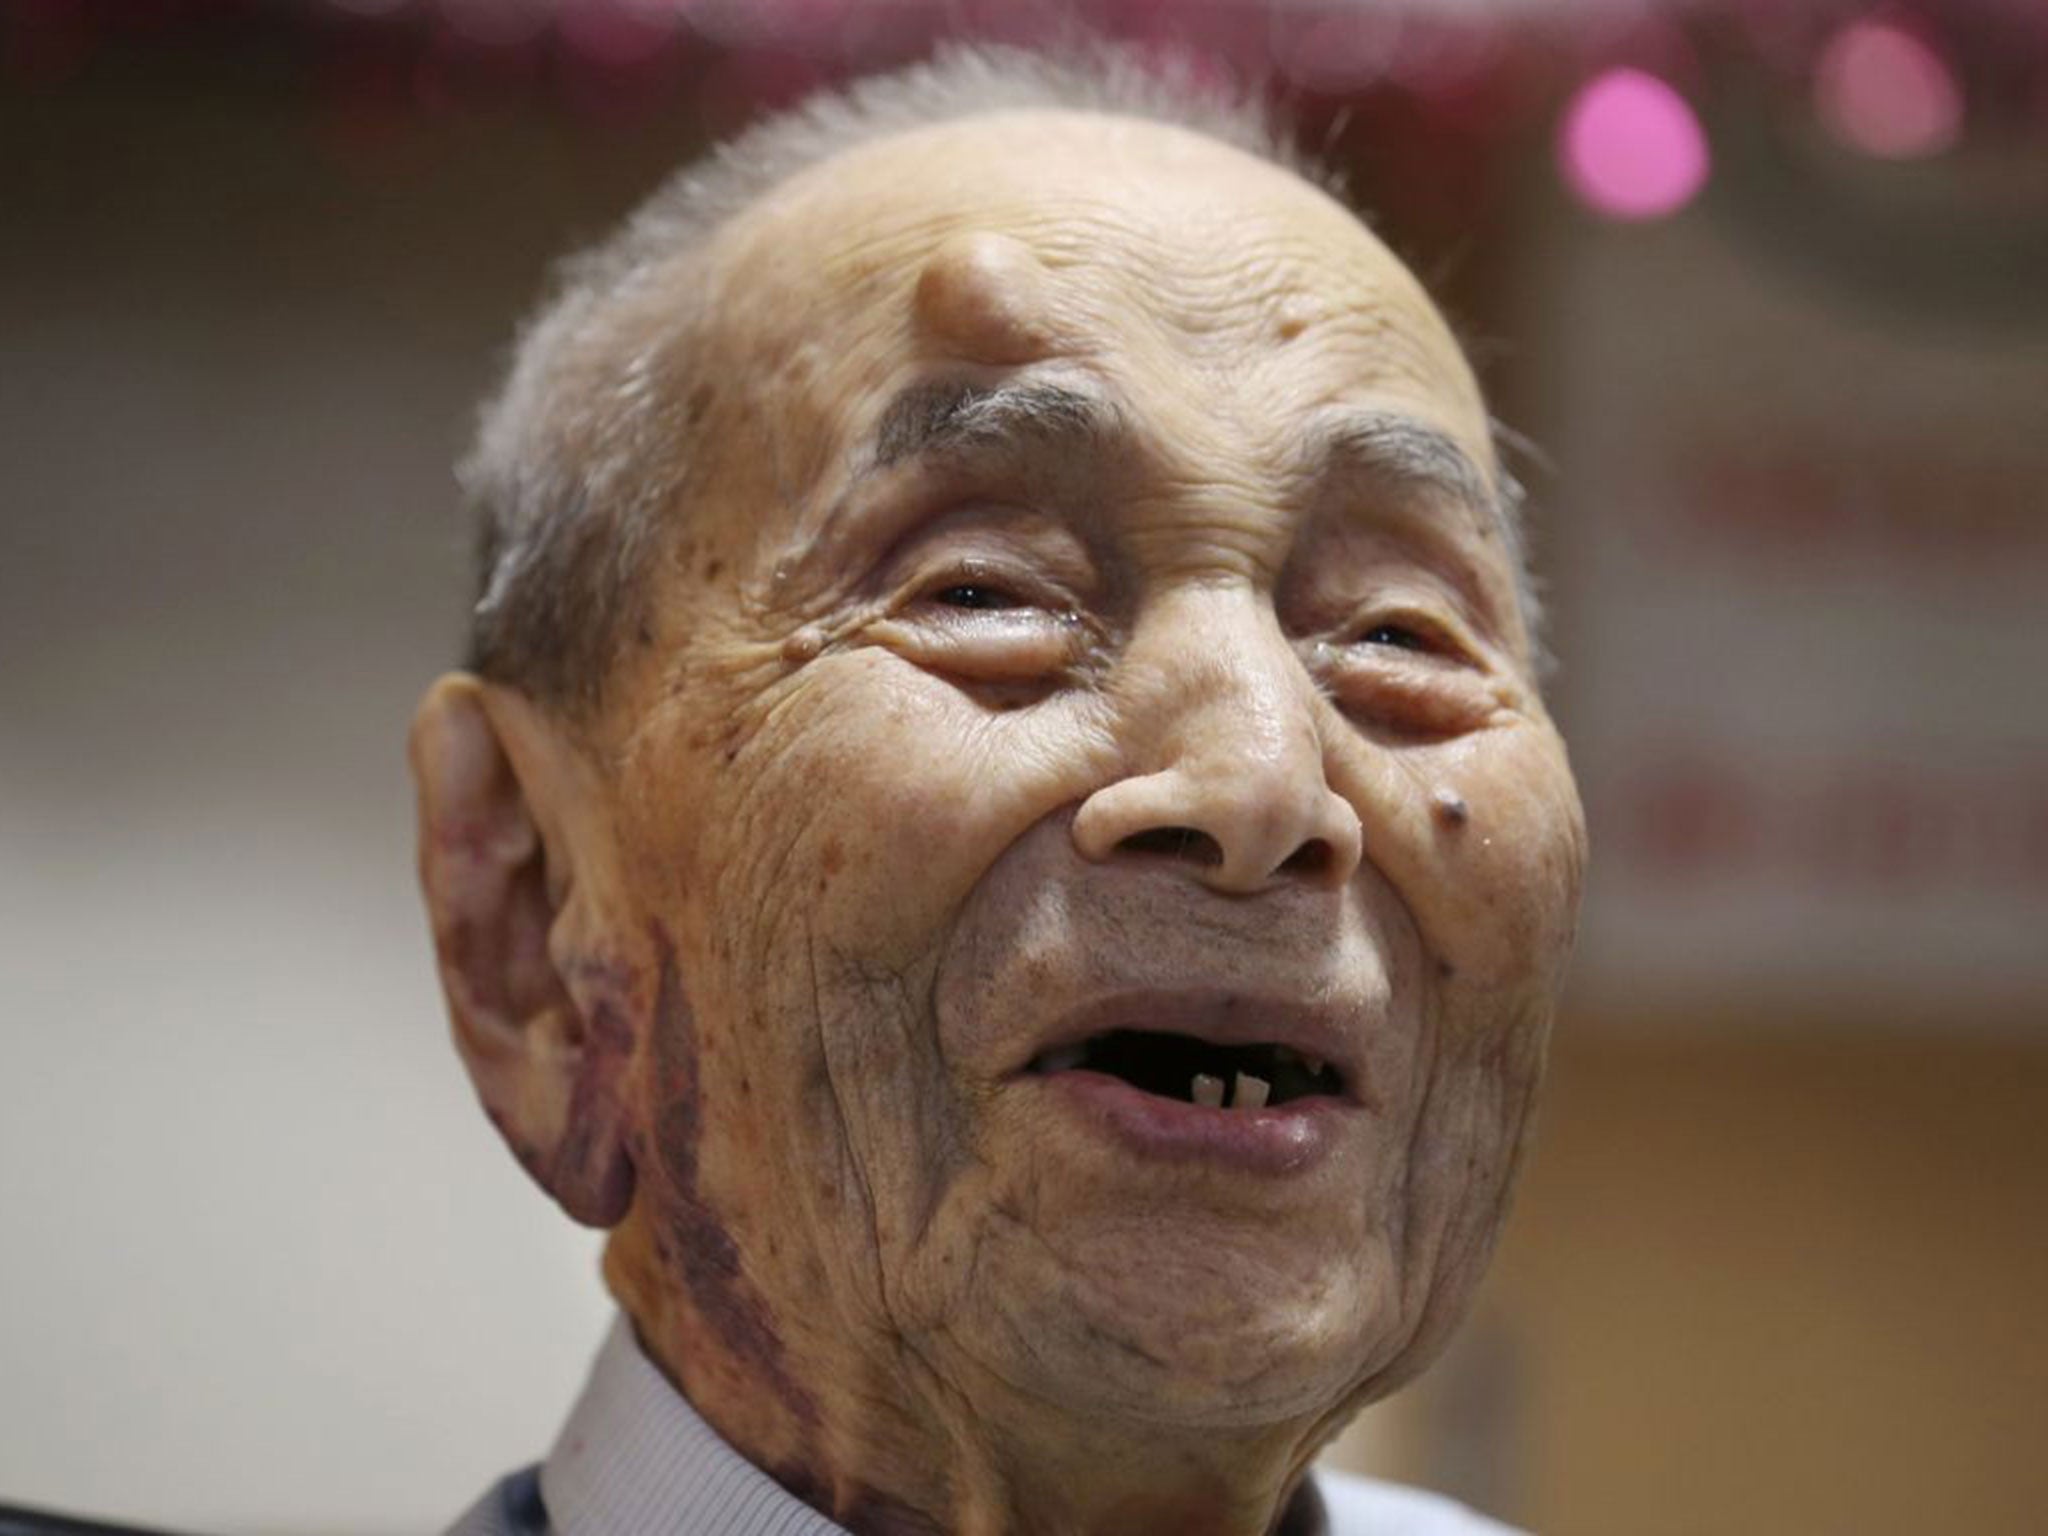 Yasutaro Koide being formally recognized as the world's oldest man by the Guinness World Records at a nursing home in Nagoya, central Japan, in August 2015.